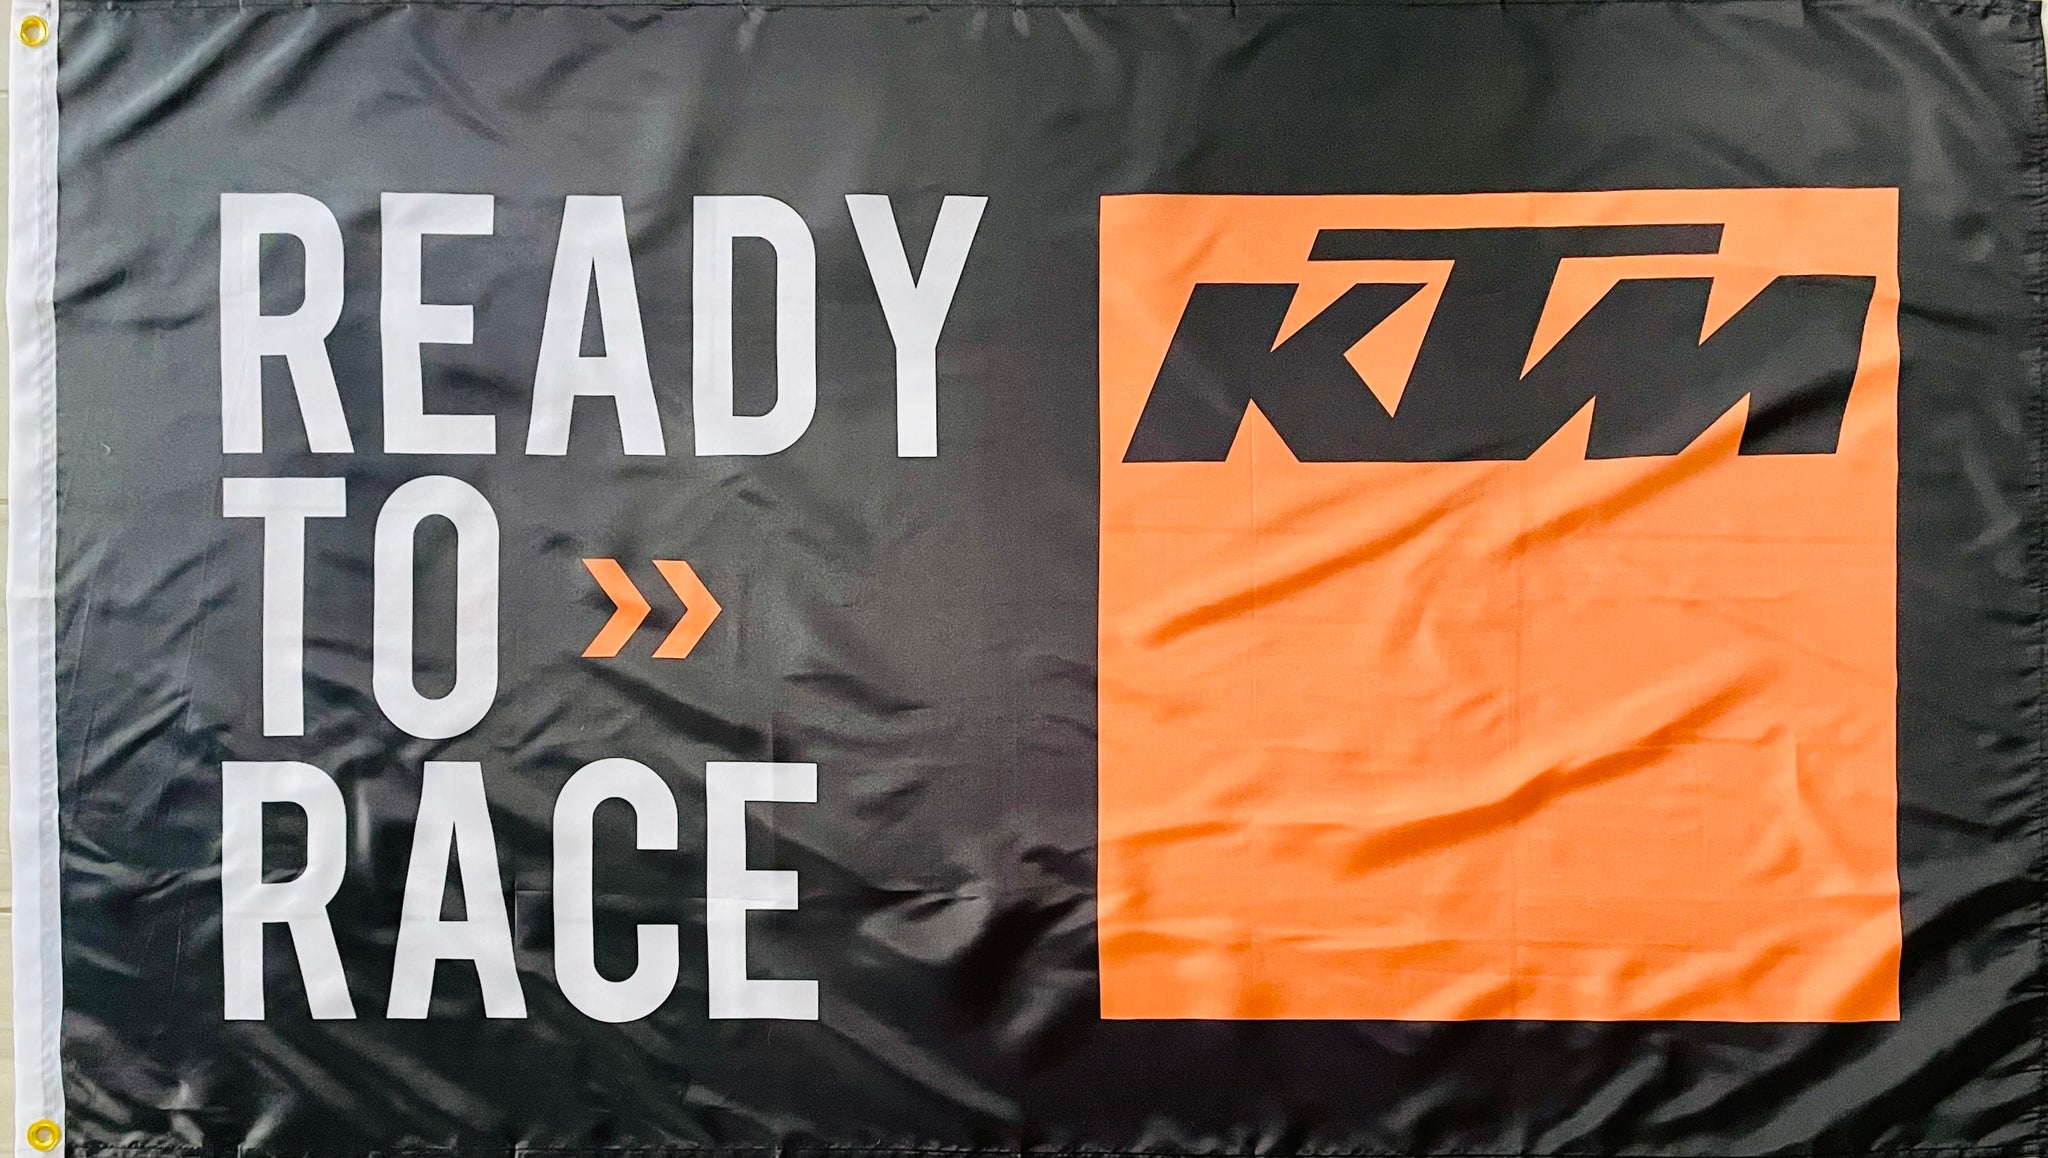 KTM READY TO RACE MOTORCYCLES 3x5ft FLAG BANNER MAN CAVE GARAGE